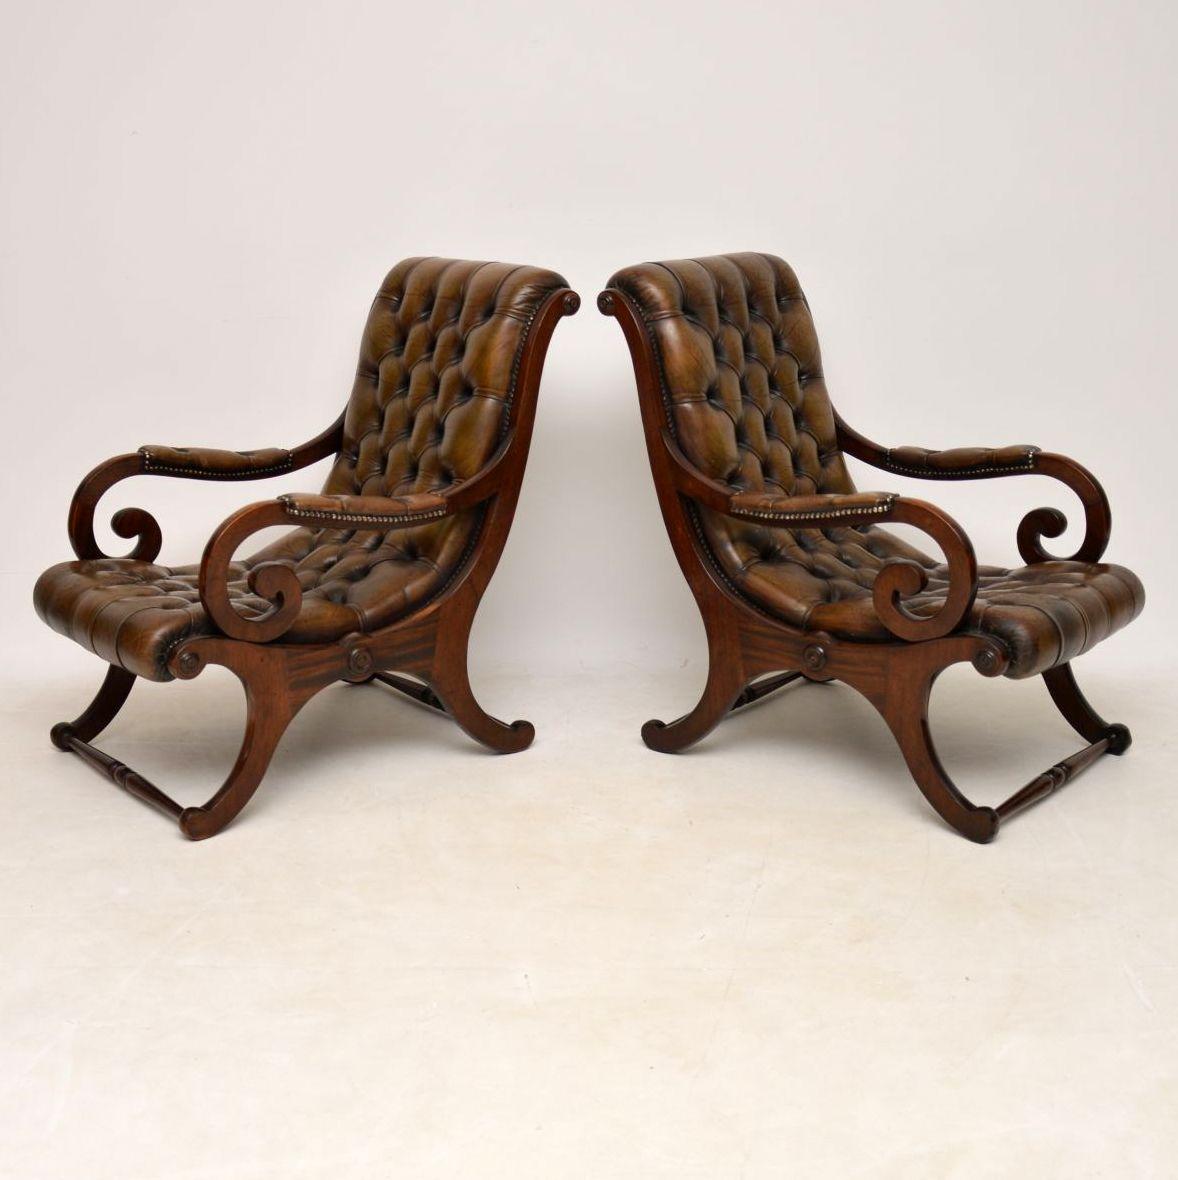 Pair of antique deep buttoned leather and mahogany ‘slipper’ armchairs’ in good condition. The leather upholstery has a wonderful original colour and loads of character. It’s deep buttoned and hand tacked onto the mahogany frames. These chairs are